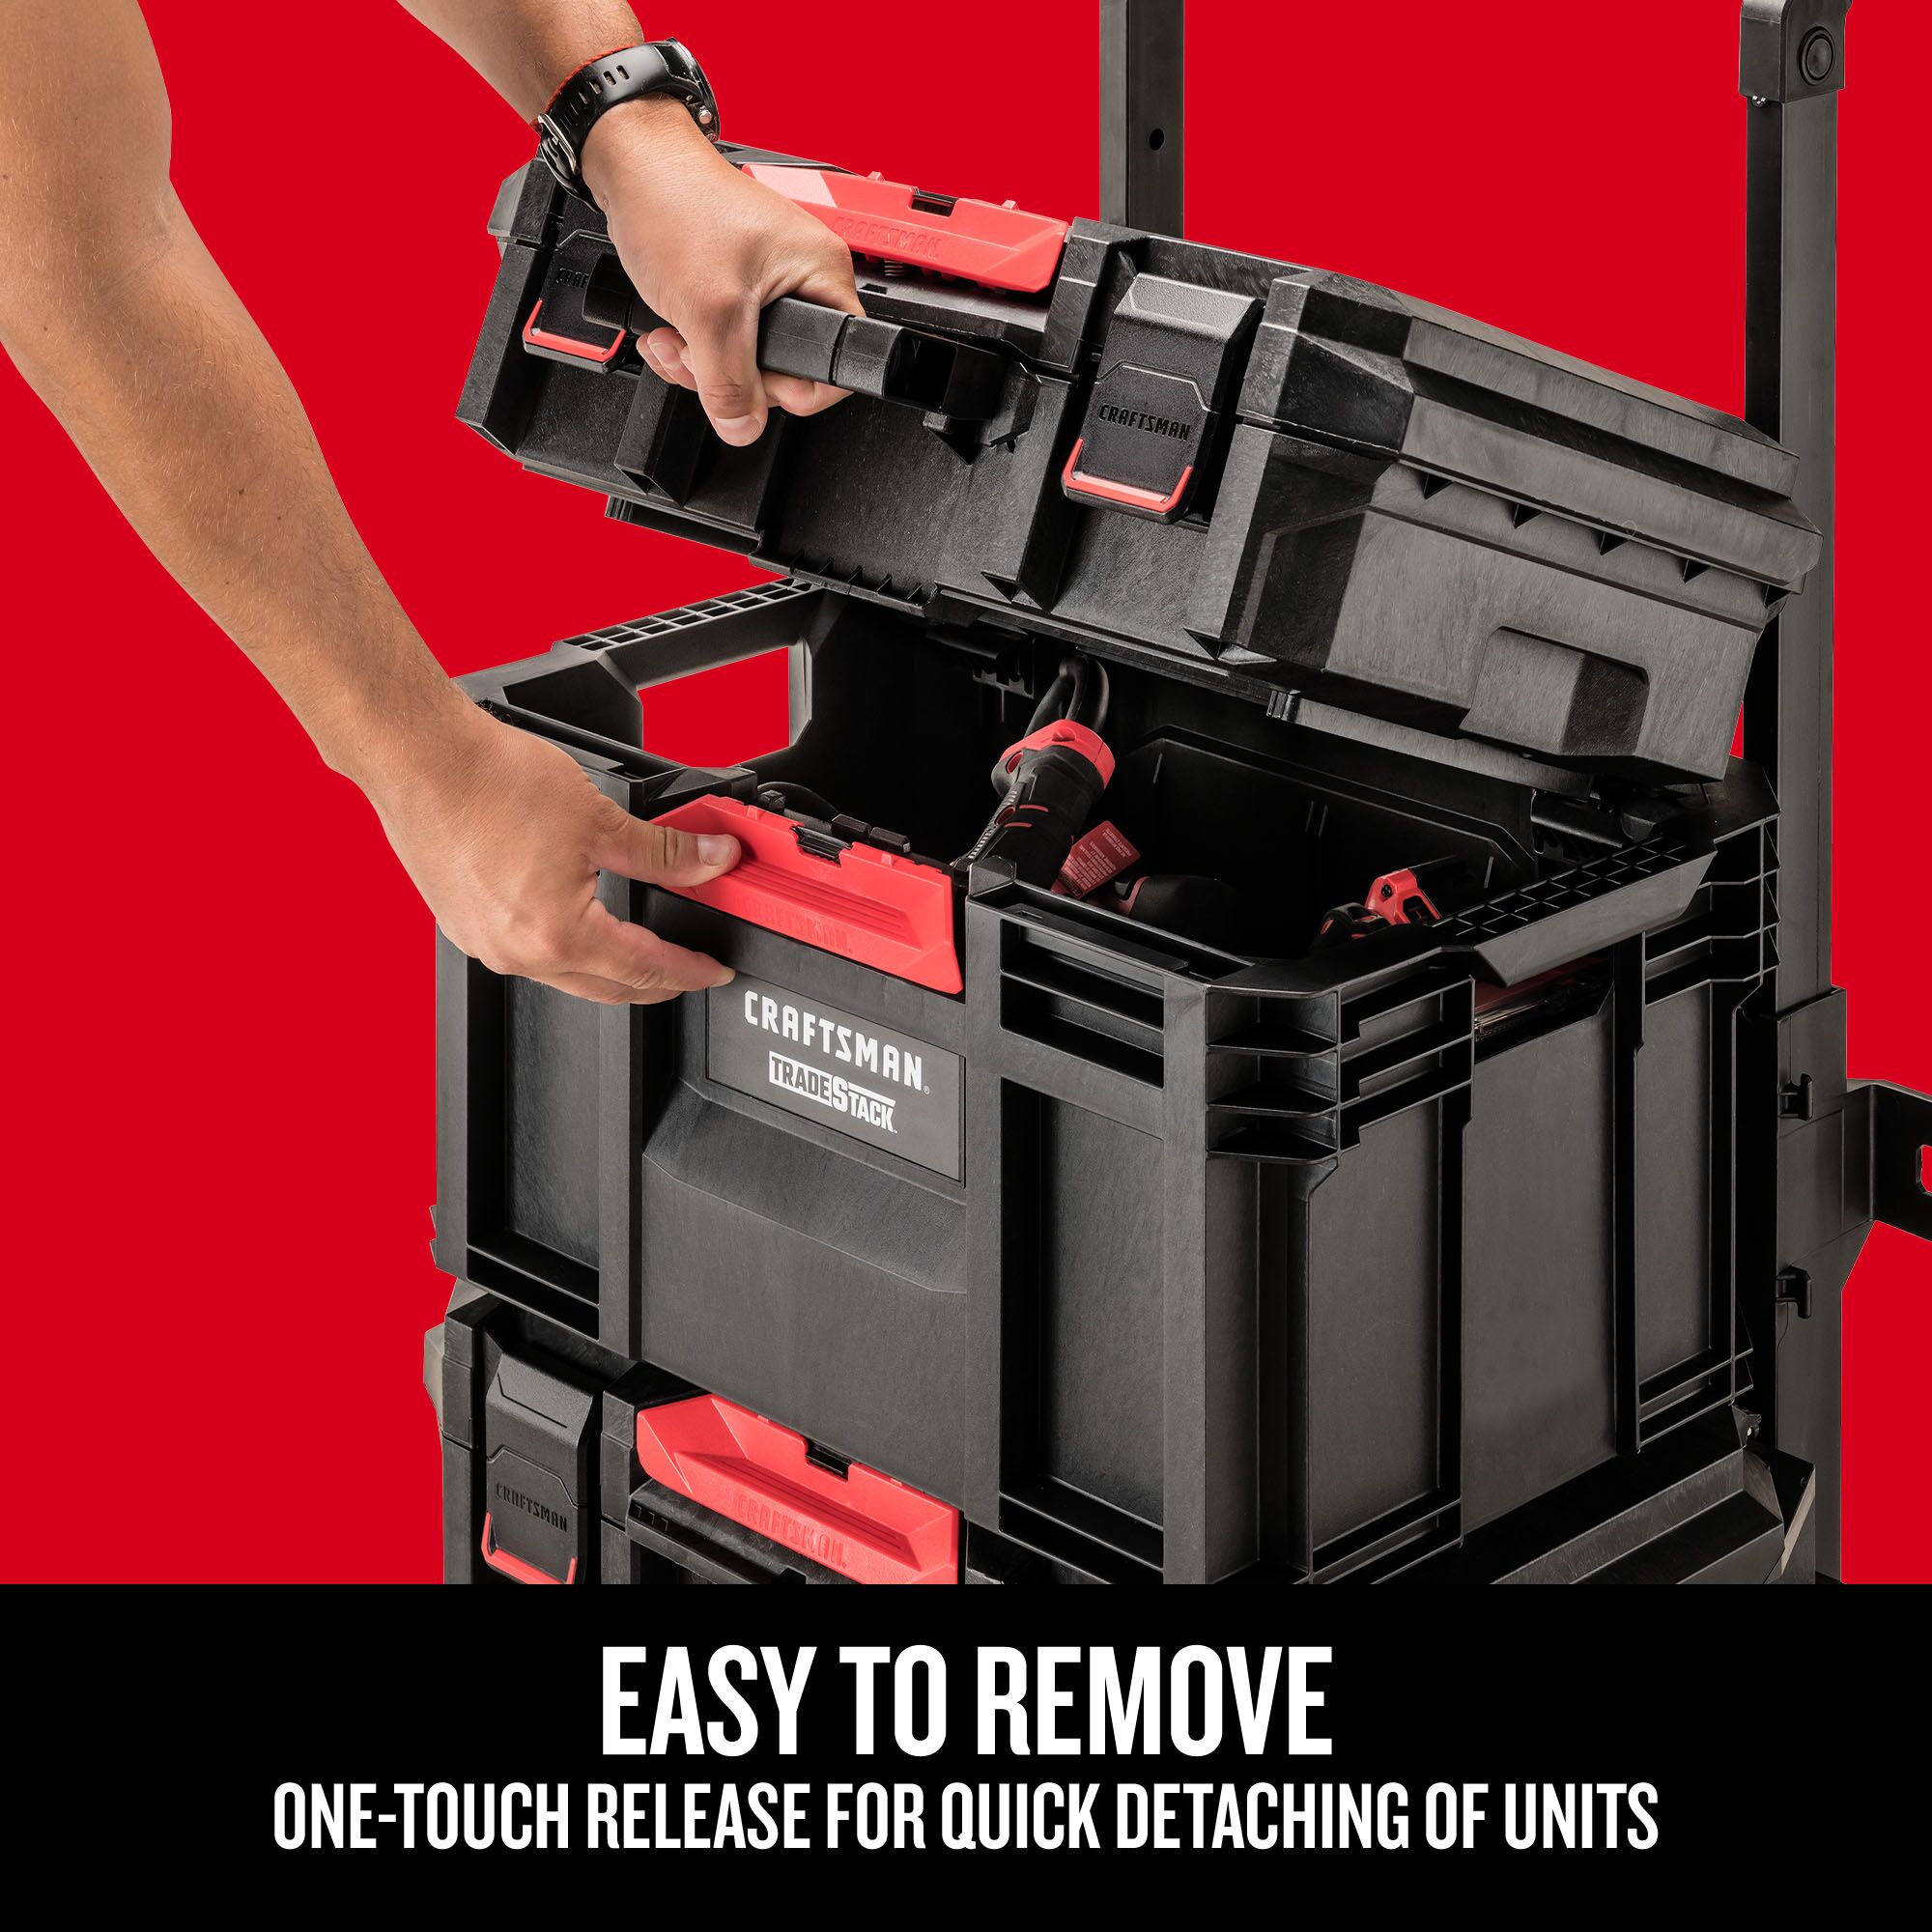 Easy to Remove. One Touch Release for quick detaching of units